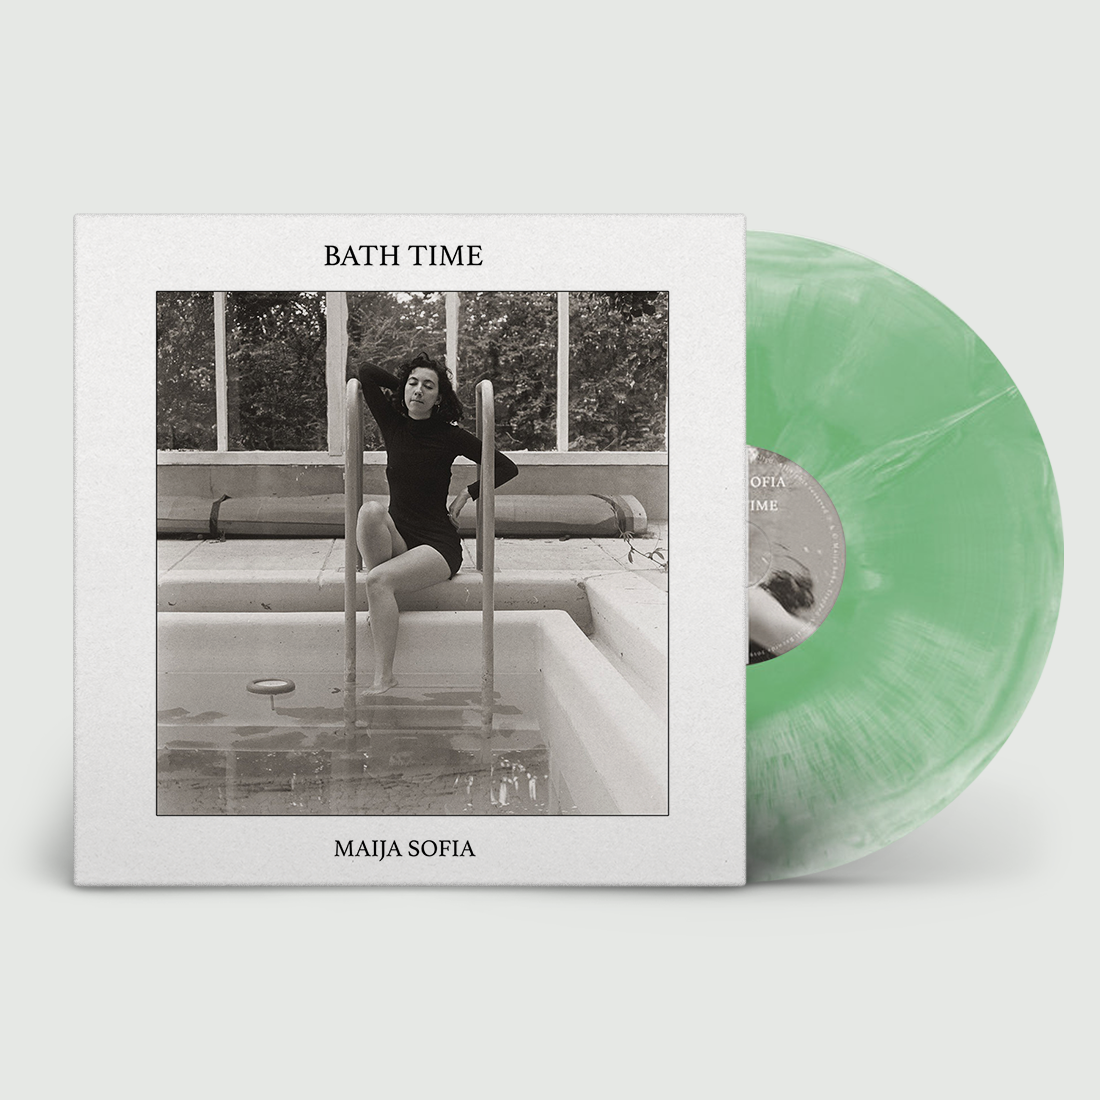 Bath Time (Anniversary Edition): Exclusive Green + White Marble Vinyl LP + Signed / Numbered Print